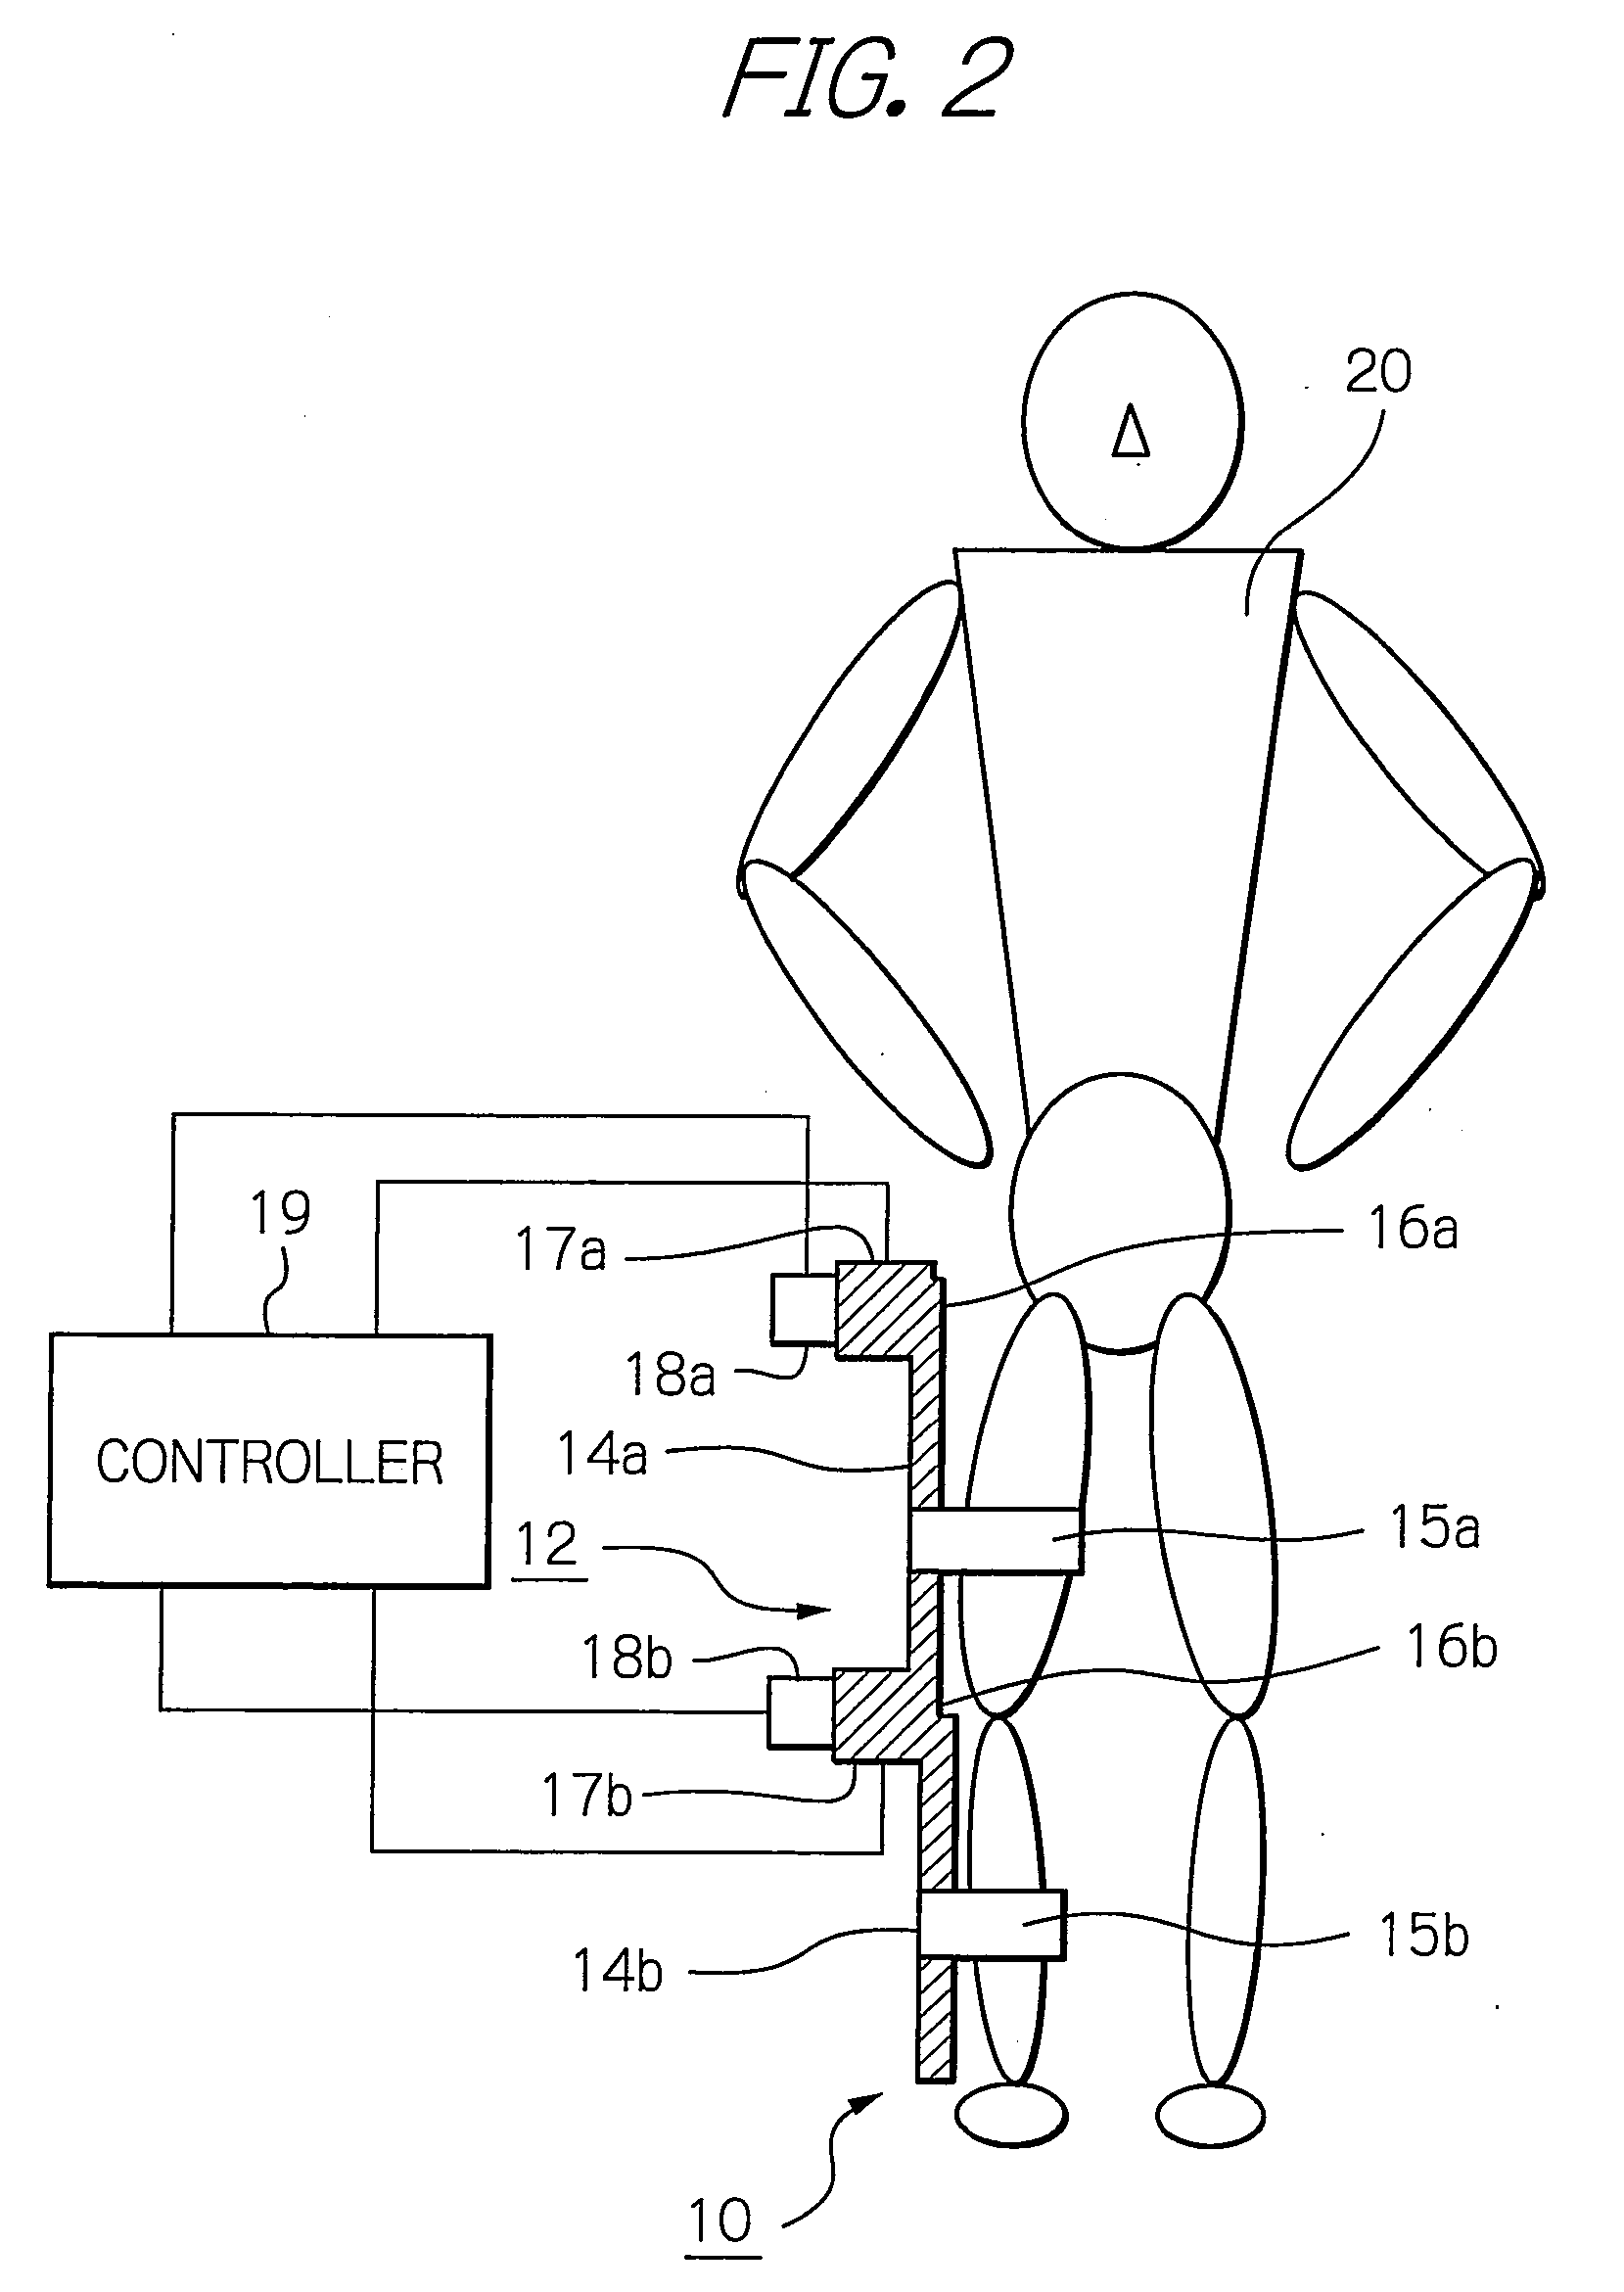 Apparatus and method for resistance-based muscular force evaluation using a hexagonal diagram of output distribution